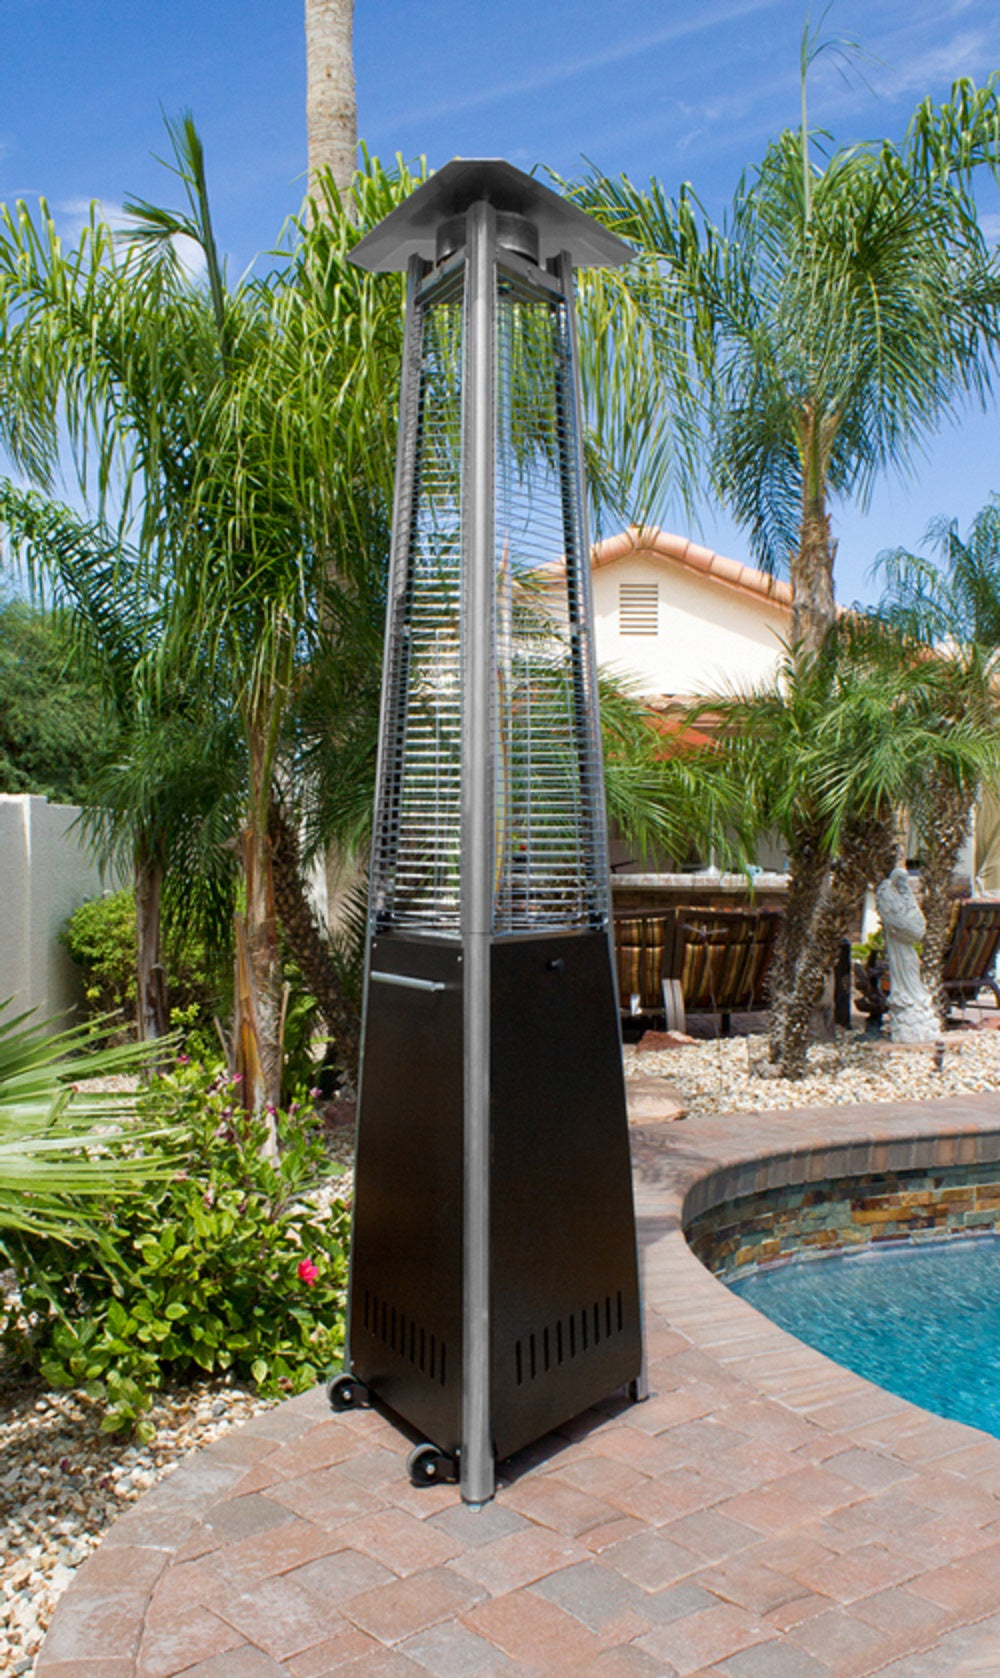 Hiland 94" Tall Commercial Triangle Glass Tube Heater-Hammered Bronze-HLDS01-CGTHG- Lifestyle Pool